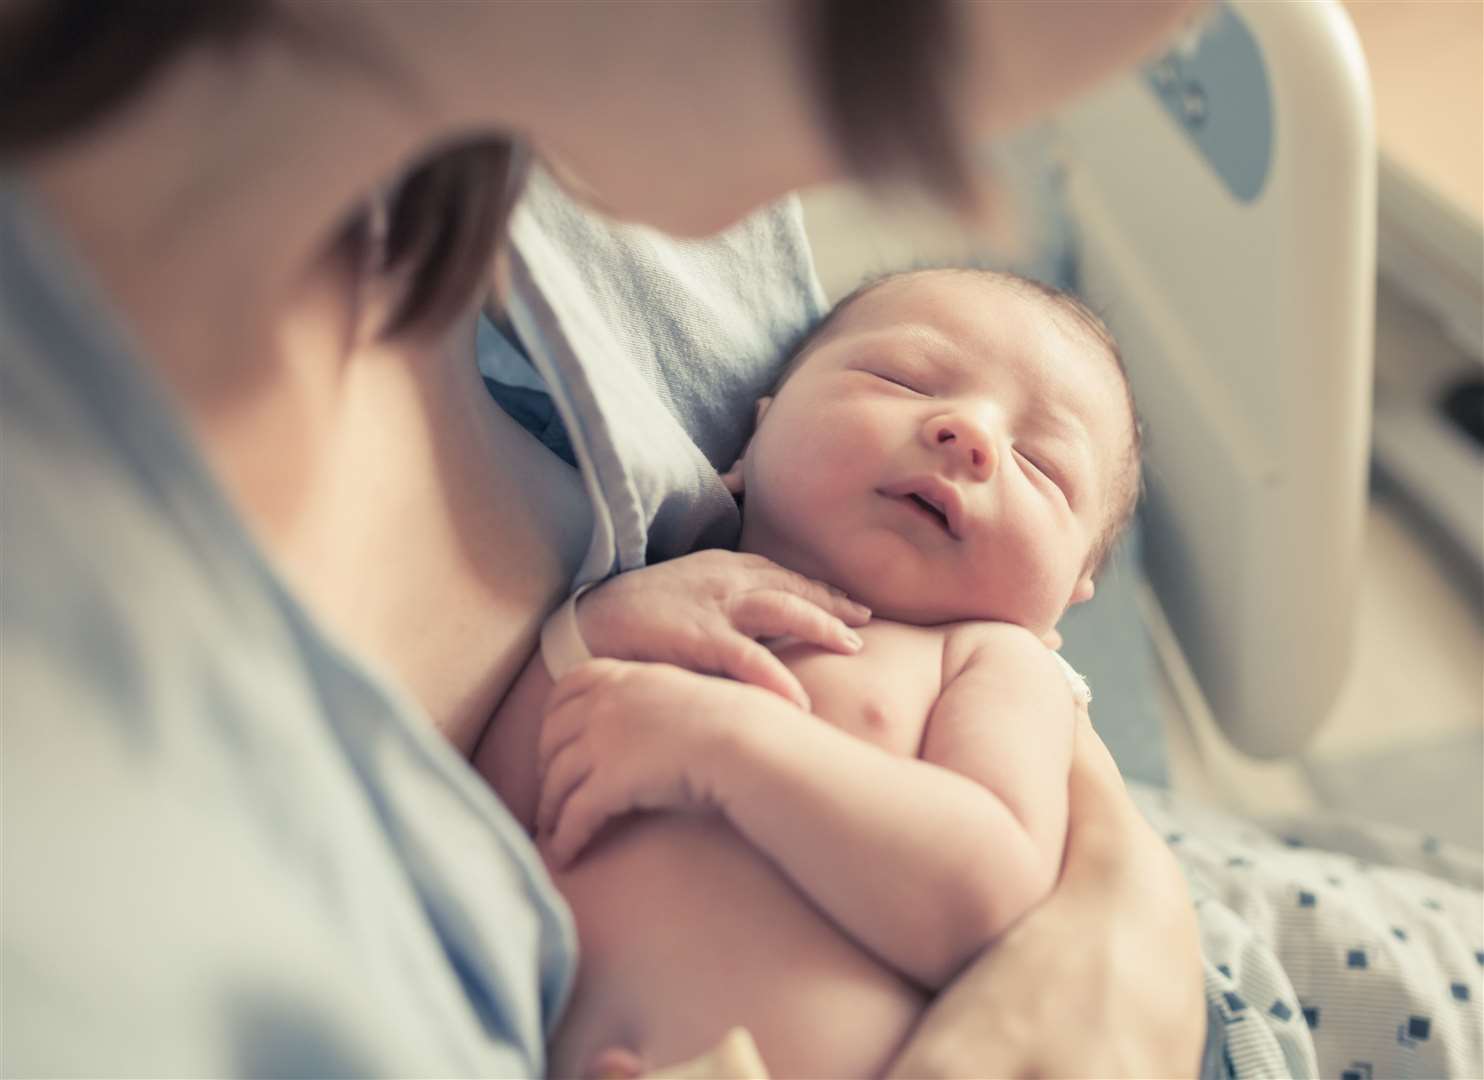 Midwives have such an important role for both new mums and new babies.